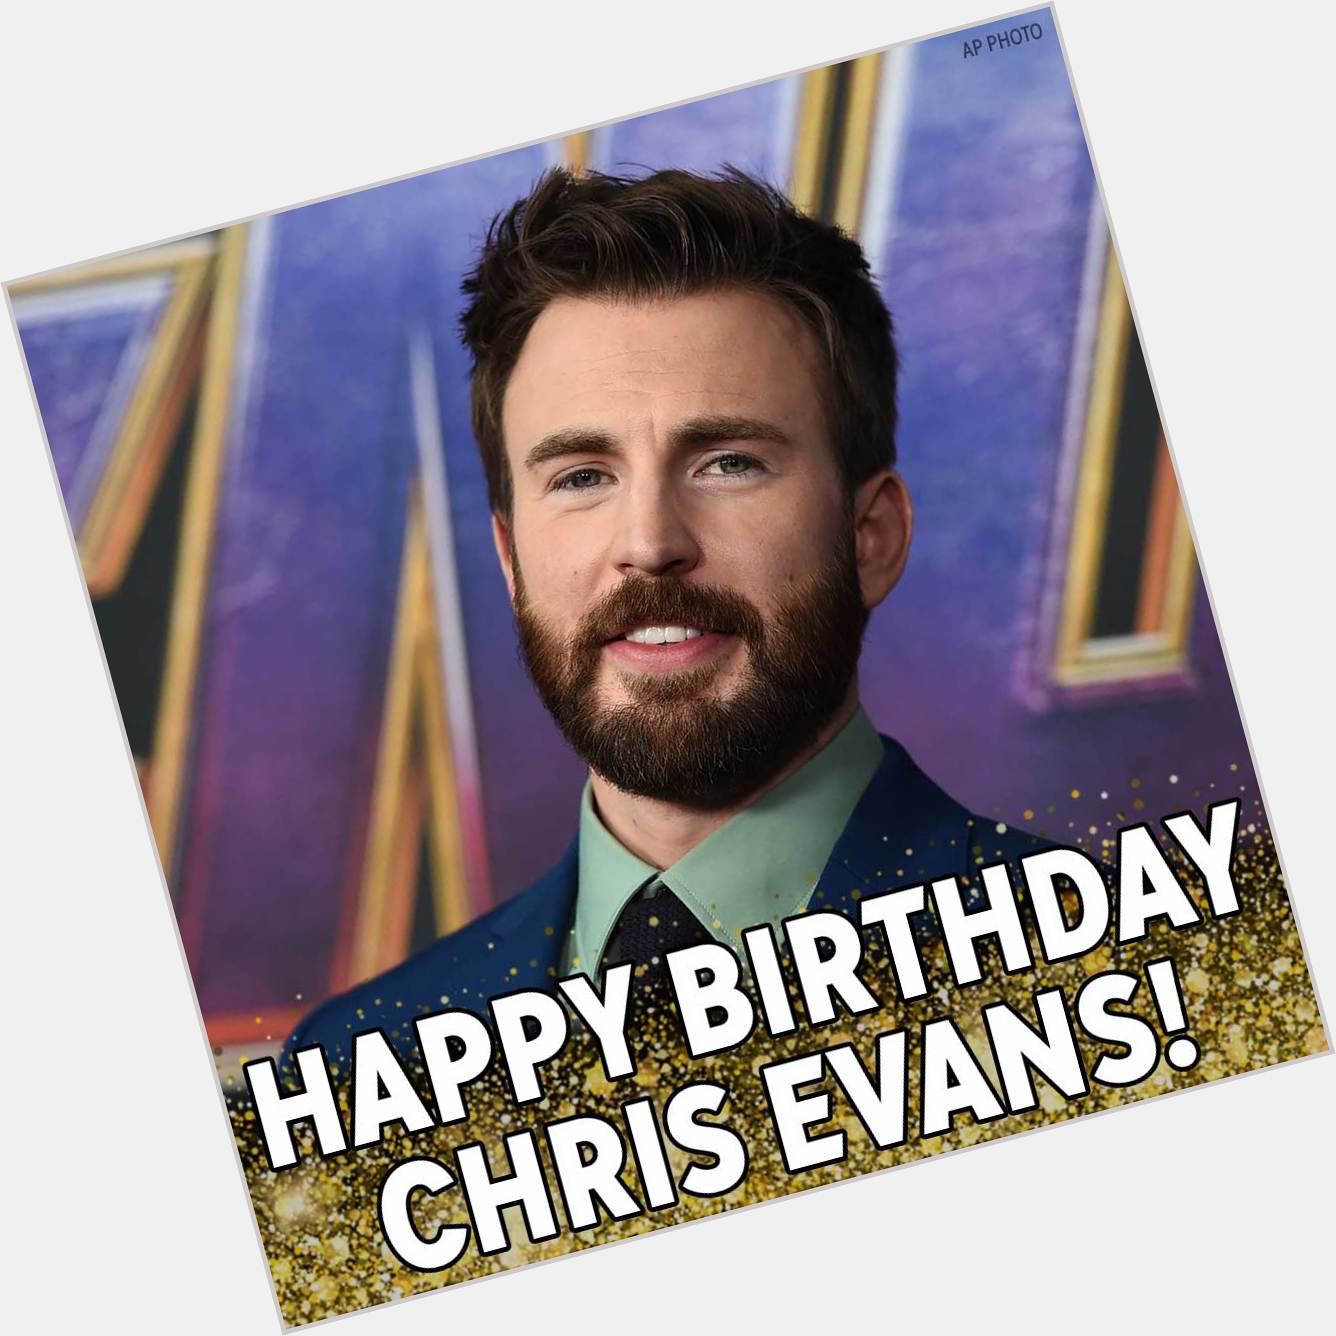 Happy Birthday, Cap! Chris Evans, best known for playing Marvel s Captain America, is celebrating a birthday today. 